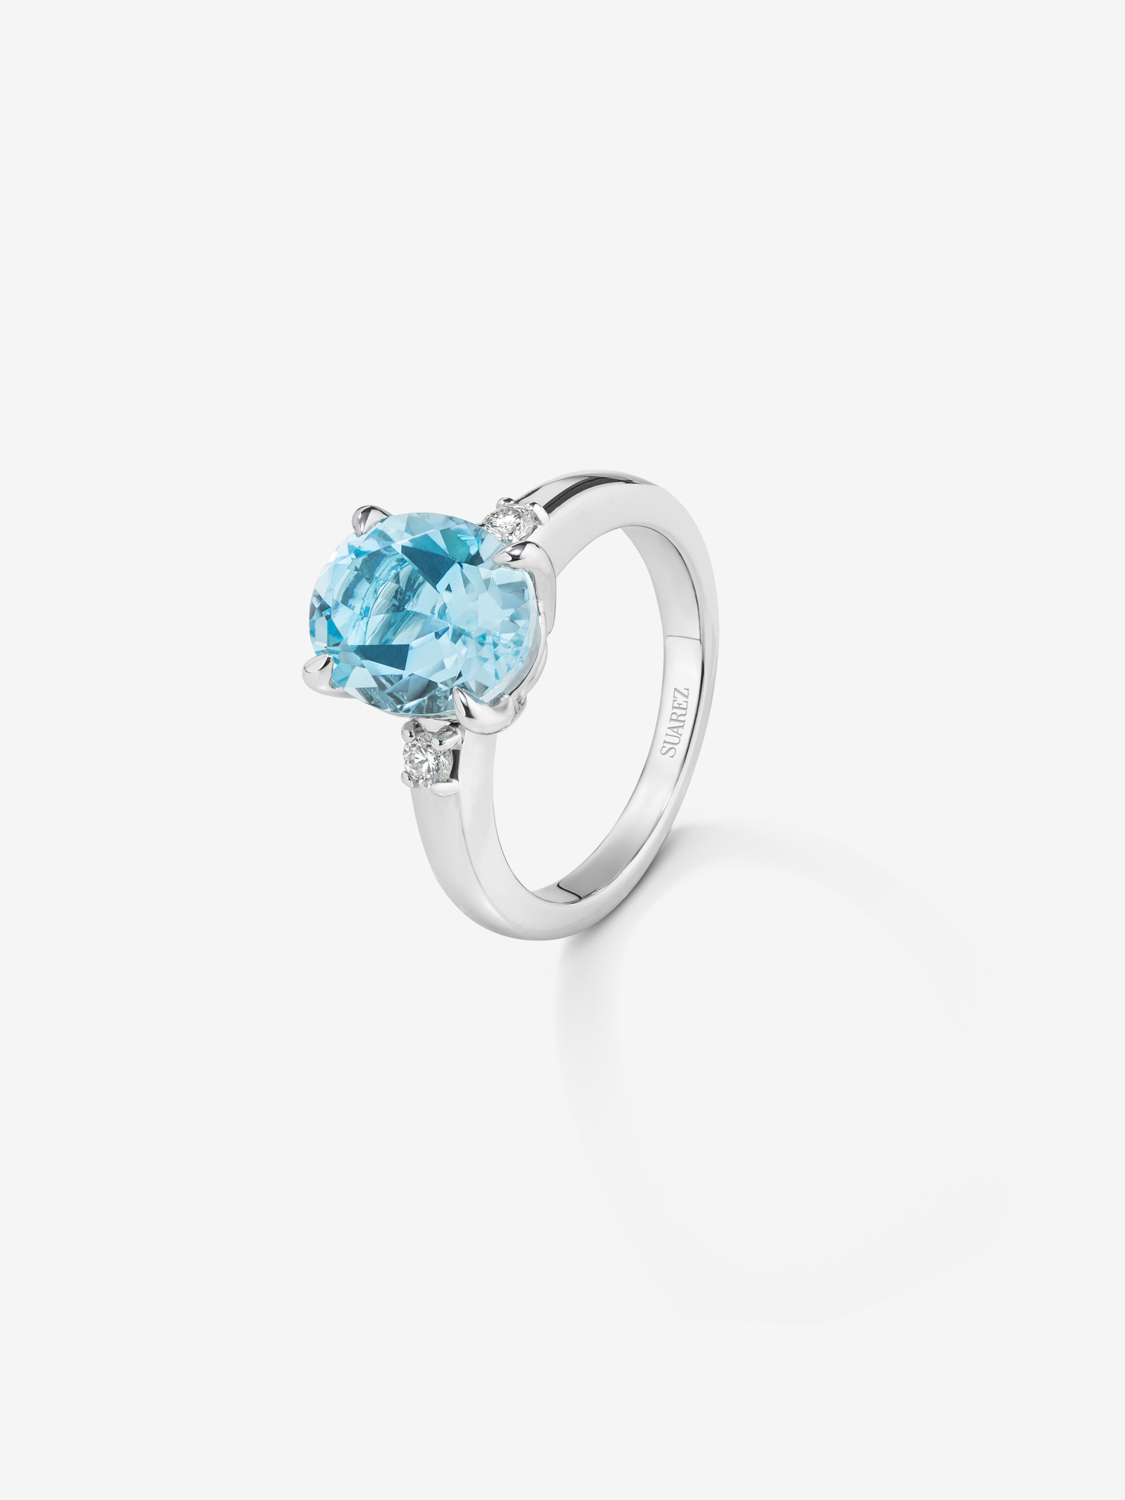 925 Silver triplet ring with topaz and diamonds